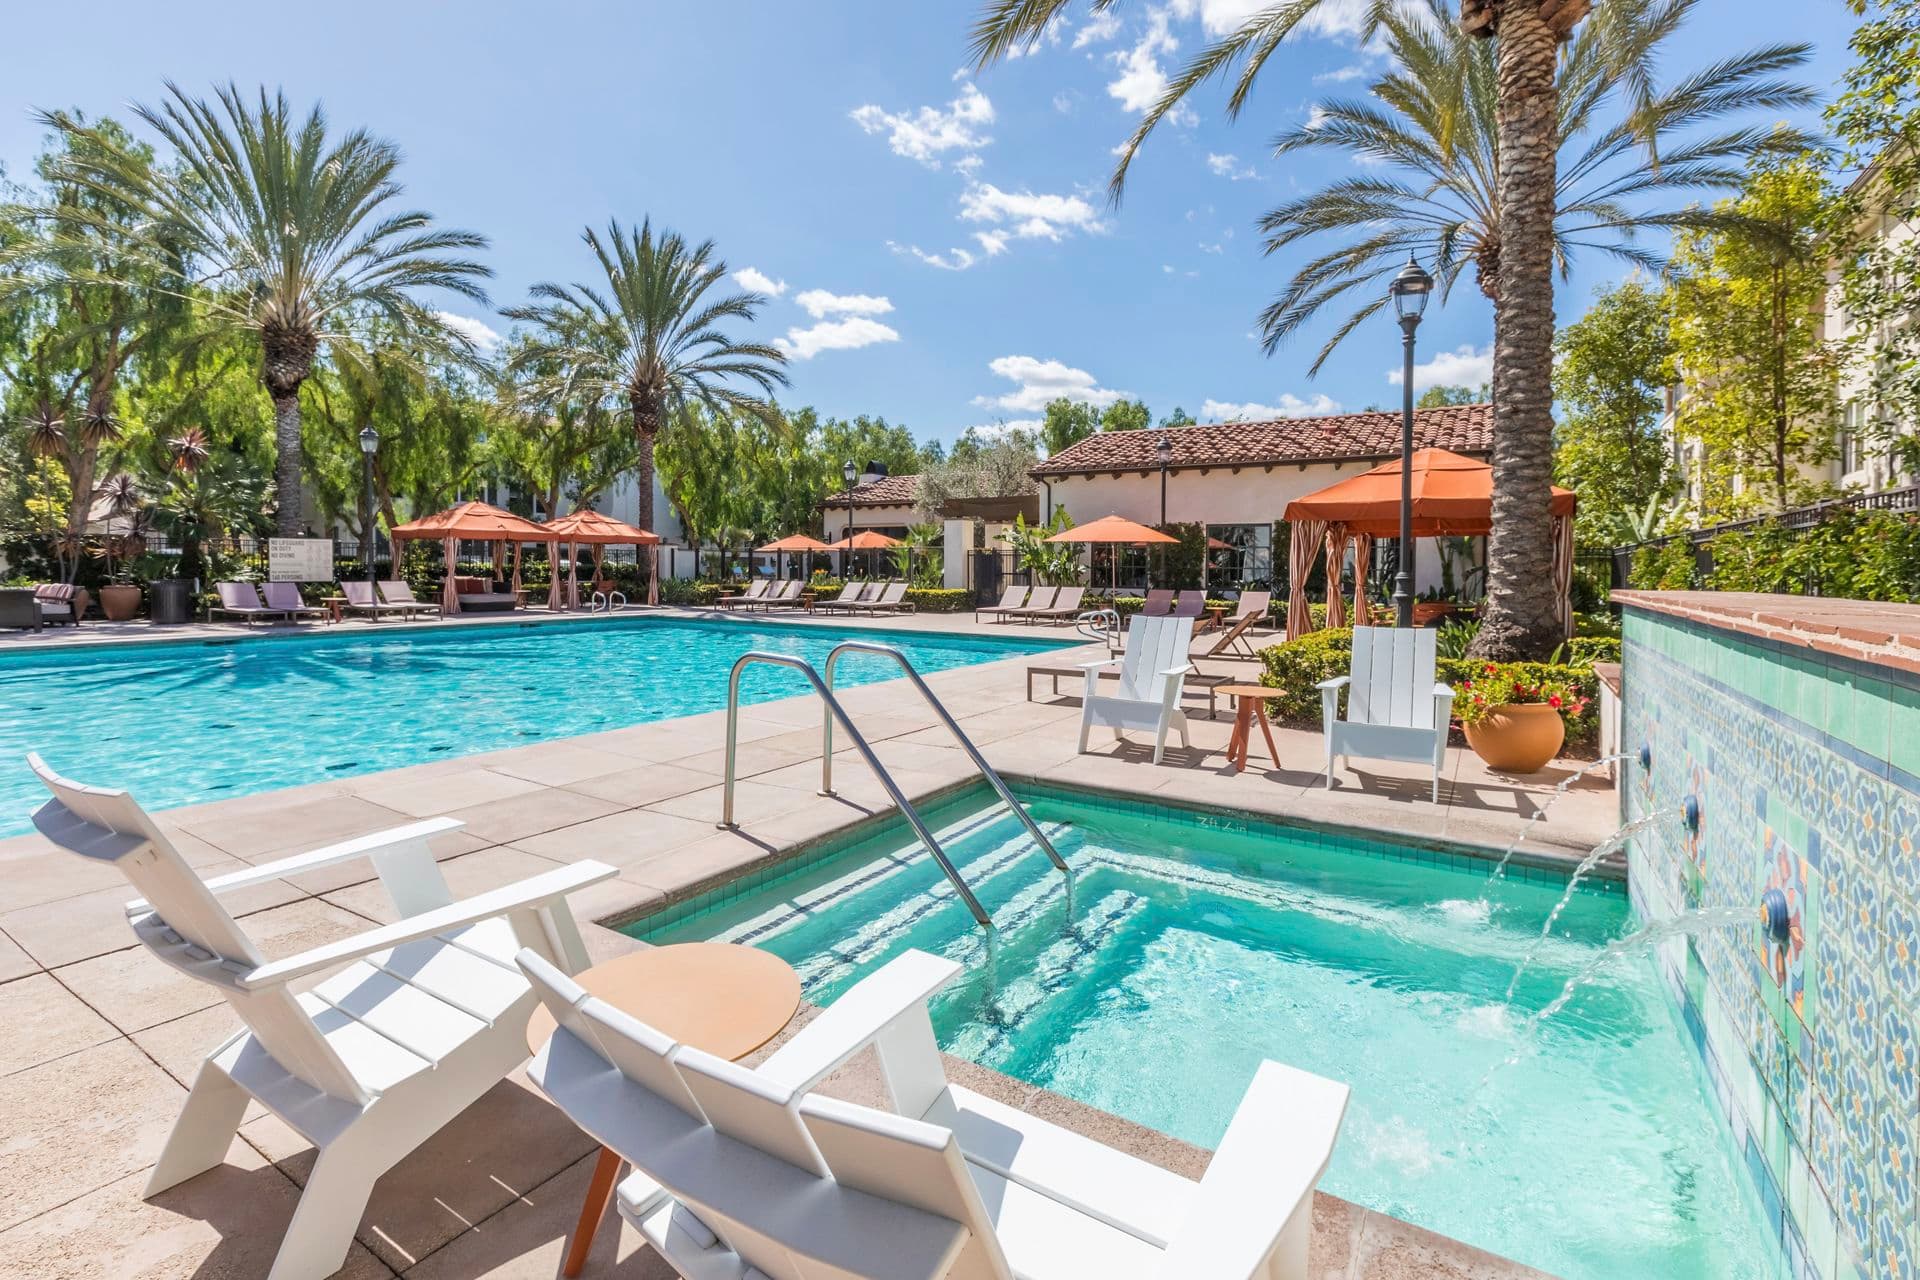 Exterior view of pool at Mirasol Apartment Homes in Stonegate, Irvine, CA.